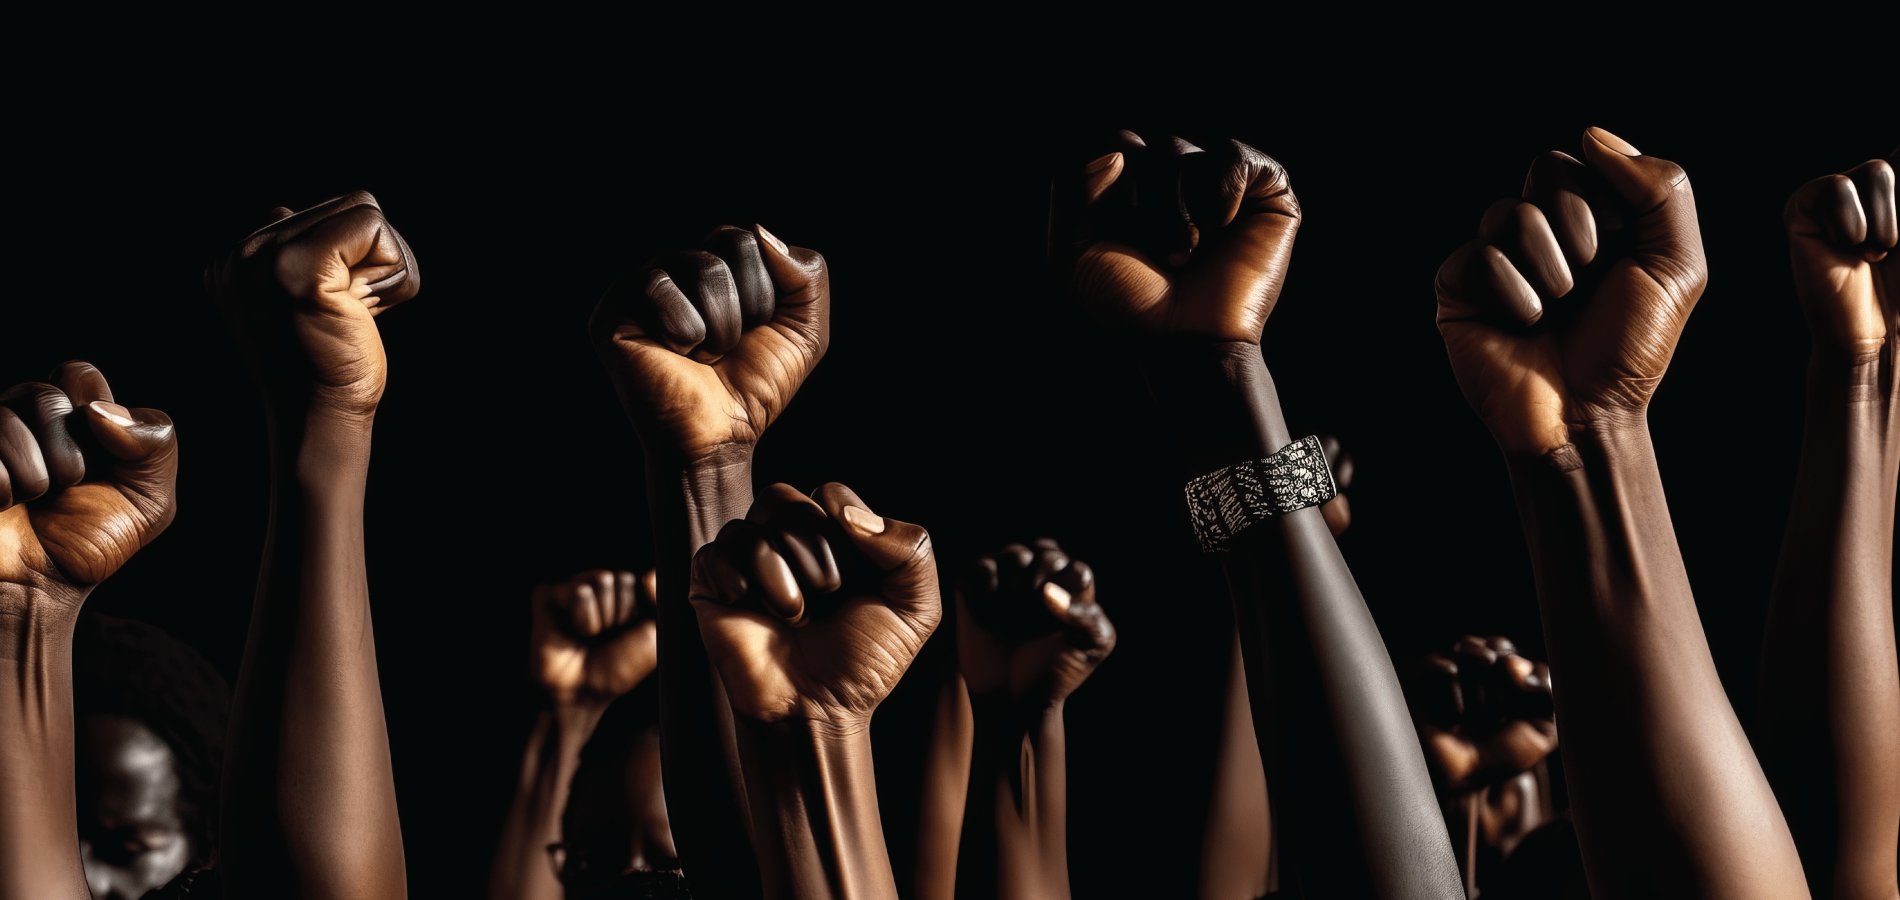 image of Black fists held up as symbol of power